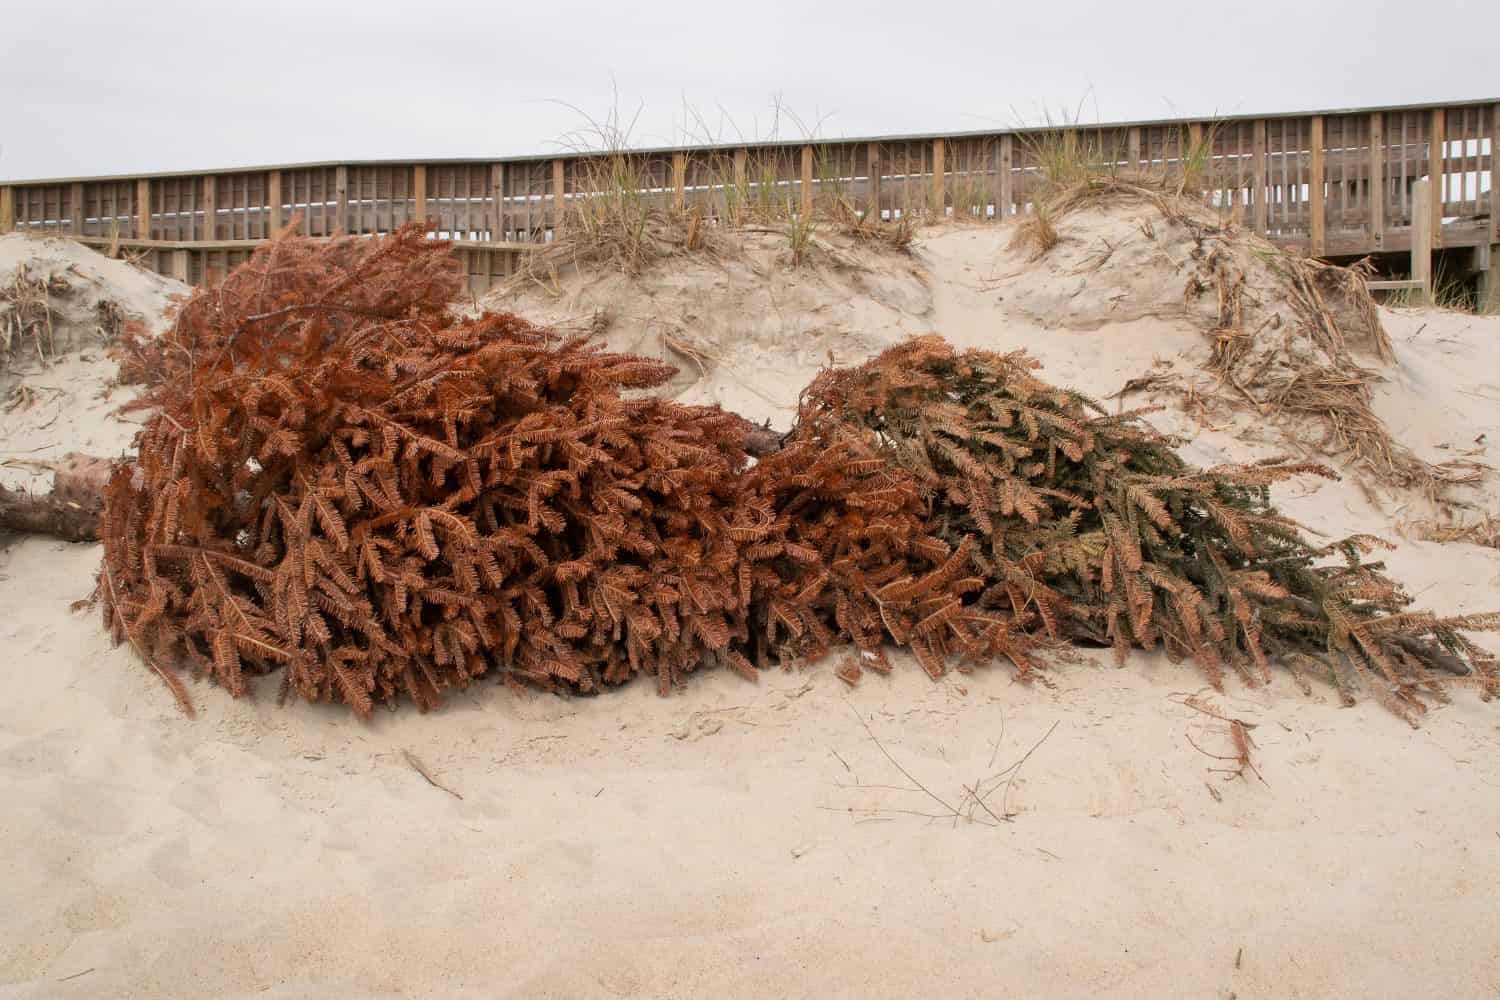 Used Christmas Trees are being used to rebuild sand dunes devasted by Hurricane Florence at emerald Isle,North Carolina